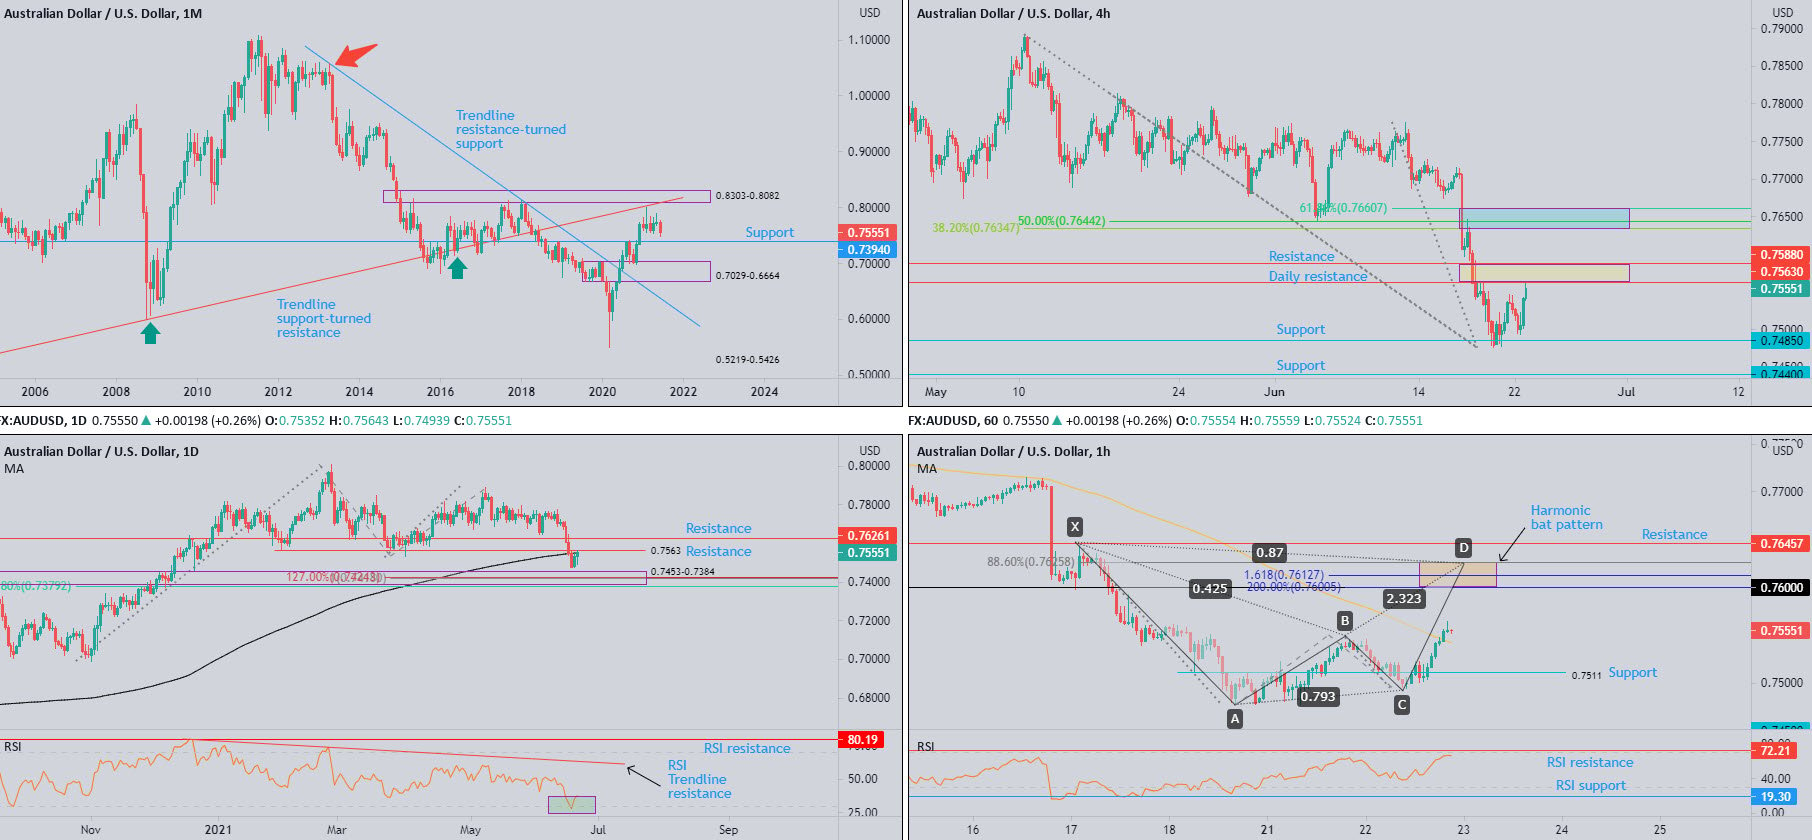 June 23rd 2021: AUD/USD Tests Daily Resistance at $0.7563, Dovetailing with the 200-day SMA, FP Markets